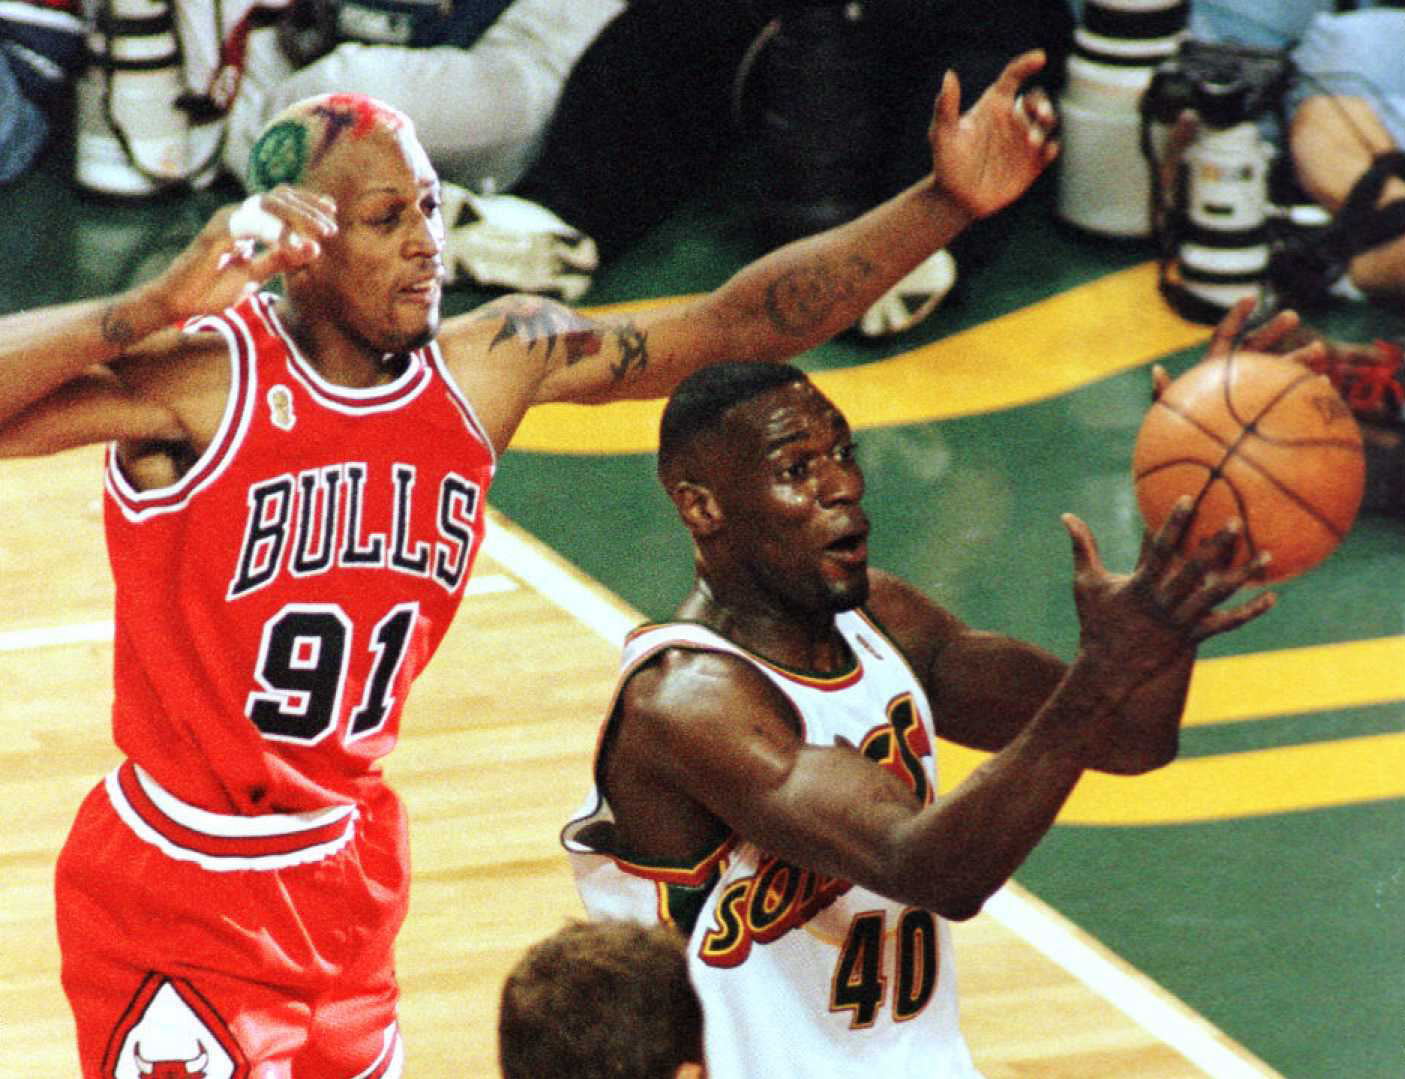 All-Star big man Shawn Kemp thrived with the Seattle SuperSonics for nearly a decade. Kemp just opened up about why he left the Sonics in 1997.